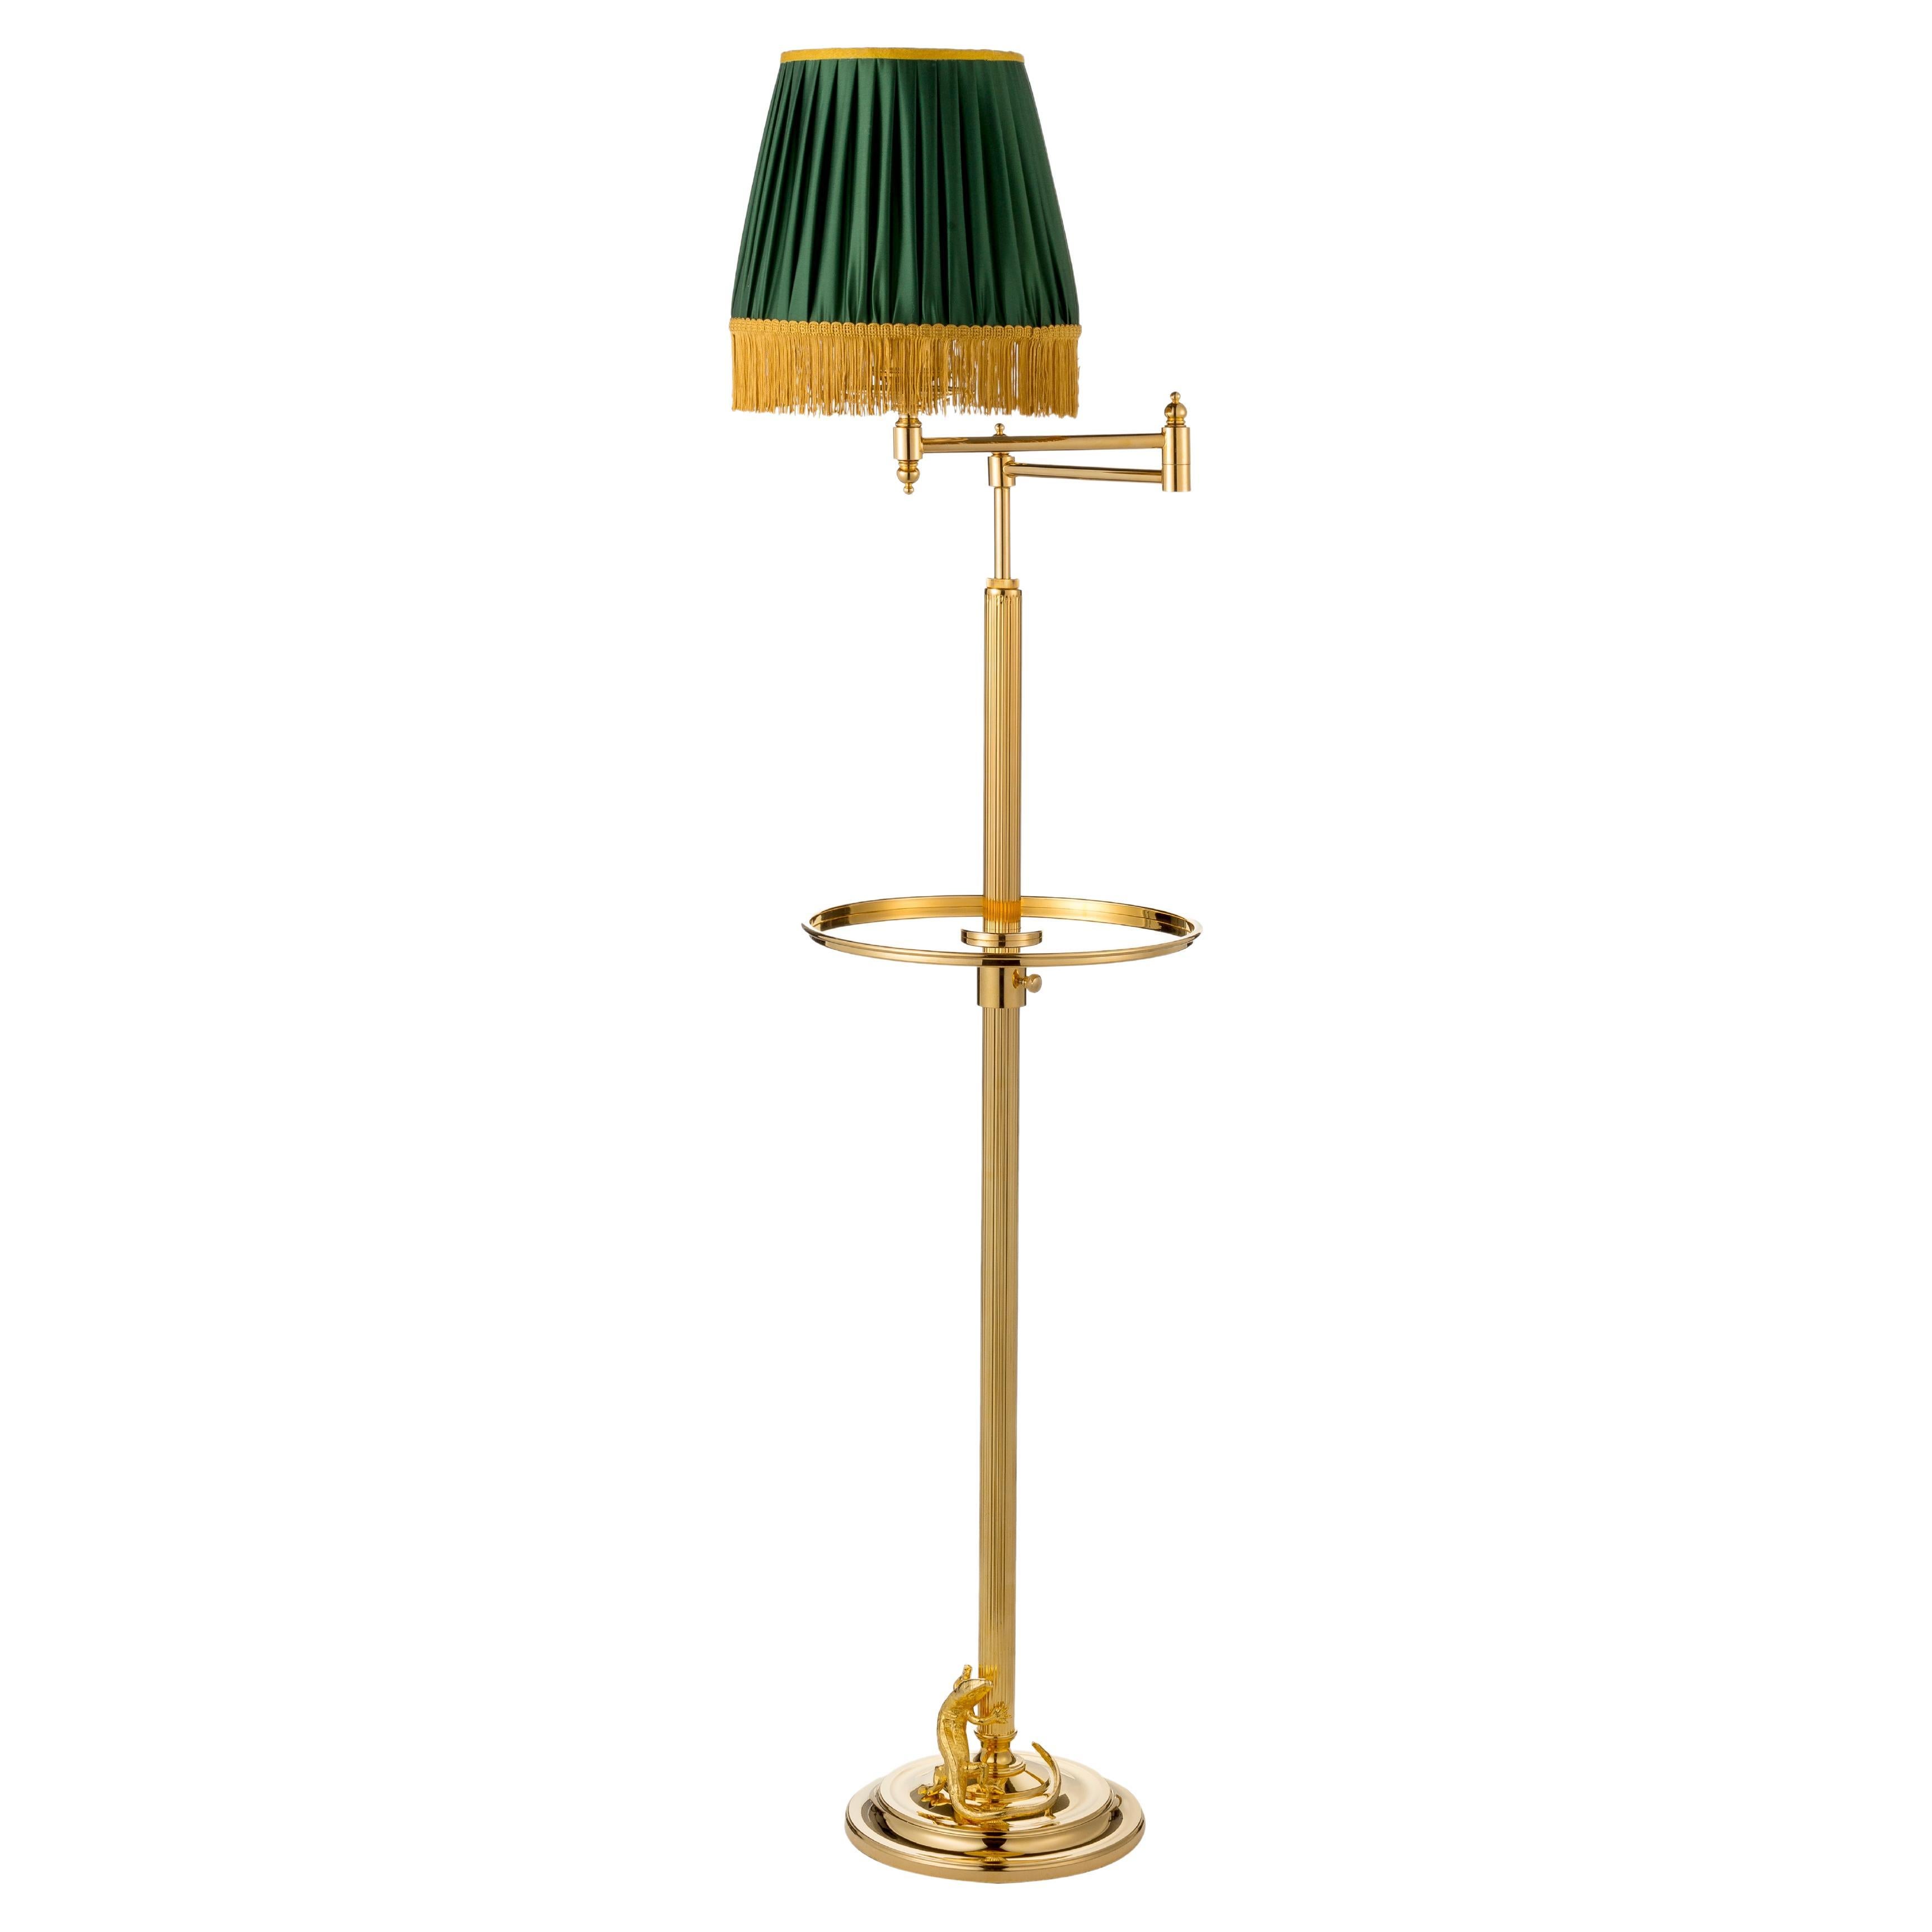 Adjustable Floor Lamp with Naural Brass Structure and Jointed Arms, Fabric Lam